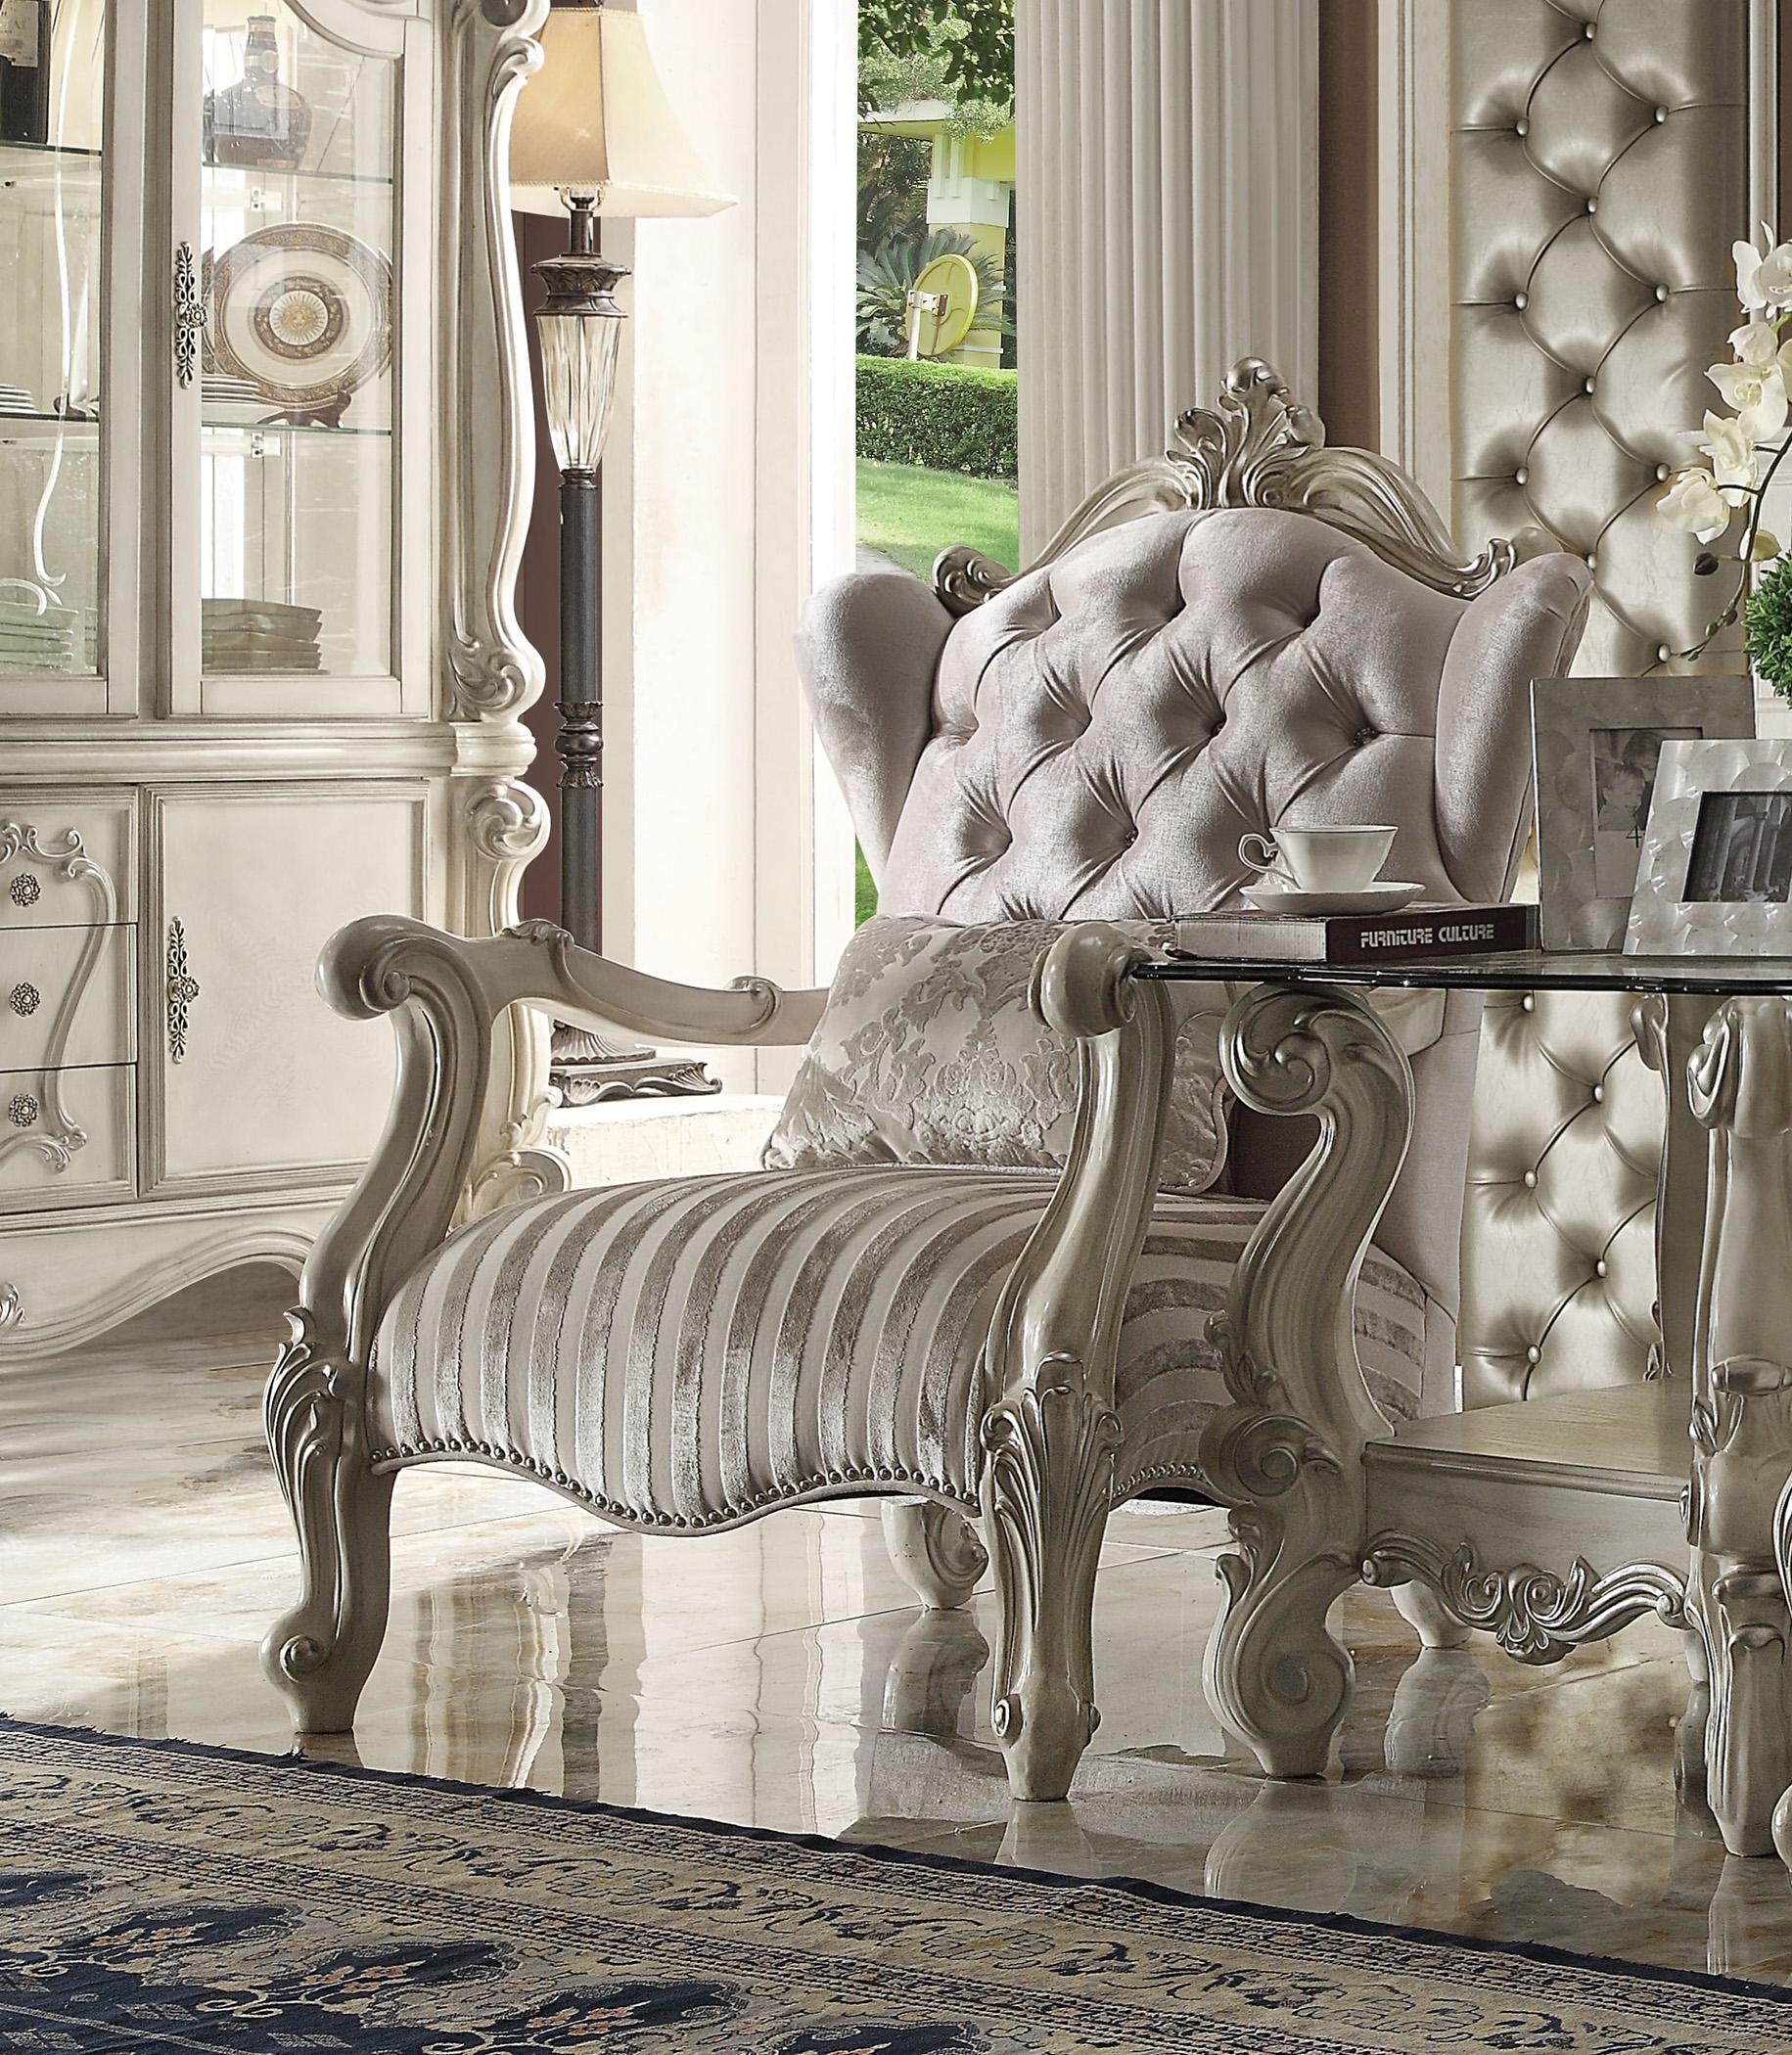 

        
Acme Furniture Versailles  52087 82104 Armchairs and End Table Bone/Ivory Fabric 0840412033438
